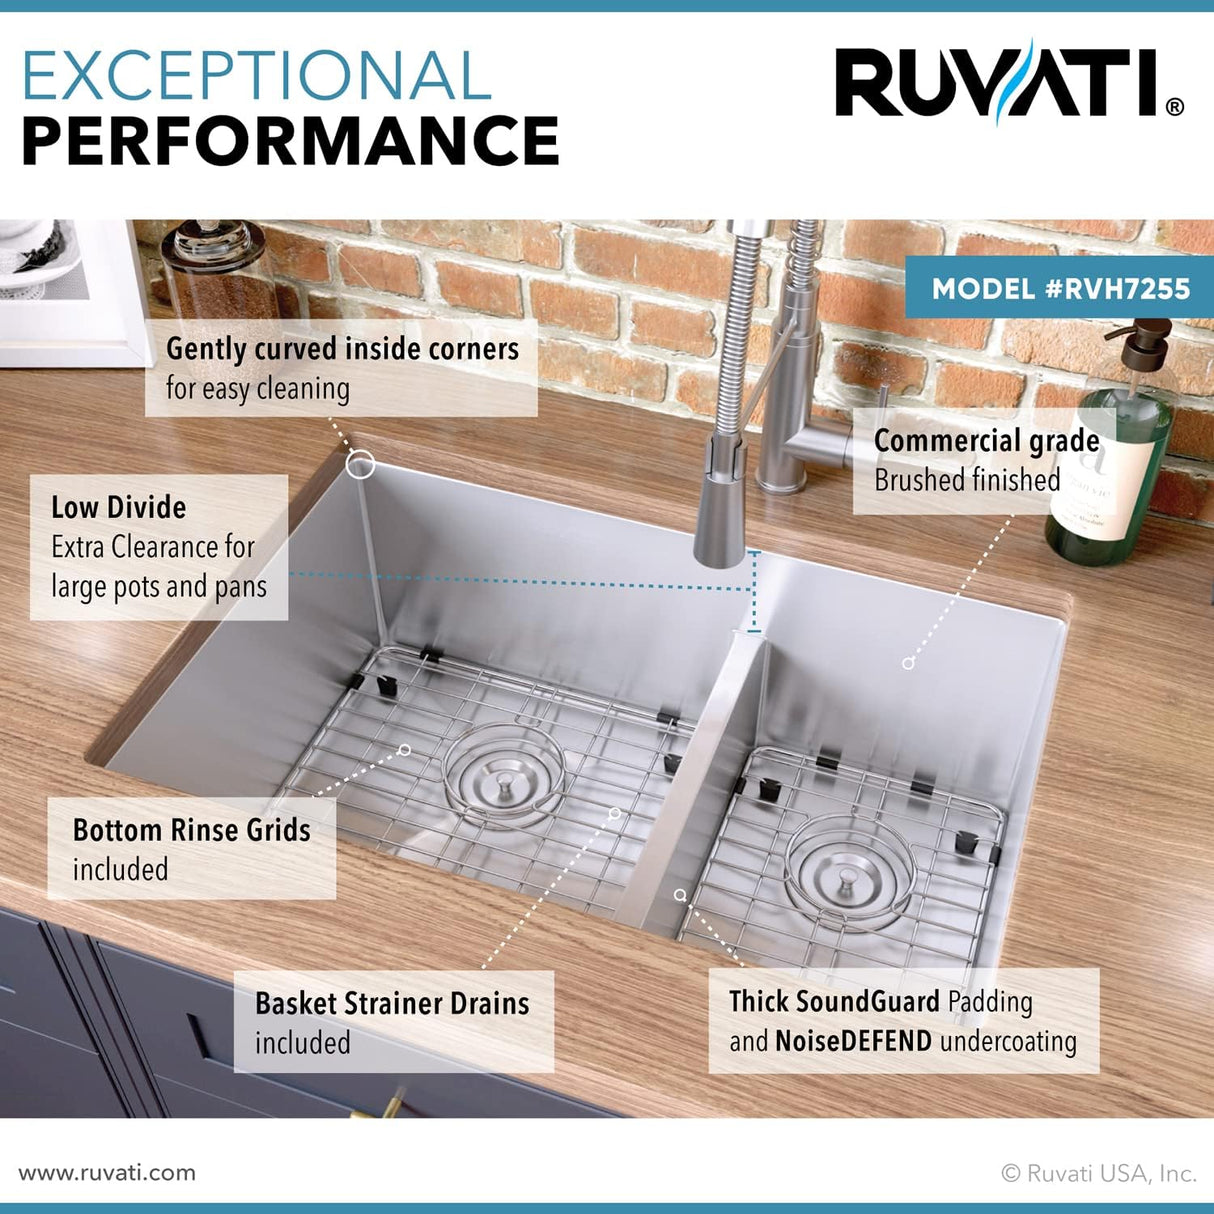 Ruvati 30-inch Low-Divide Undermount Rounded Corners 50/50 Double Bowl 16 Gauge Stainless Steel Kitchen Sink – RVH7355